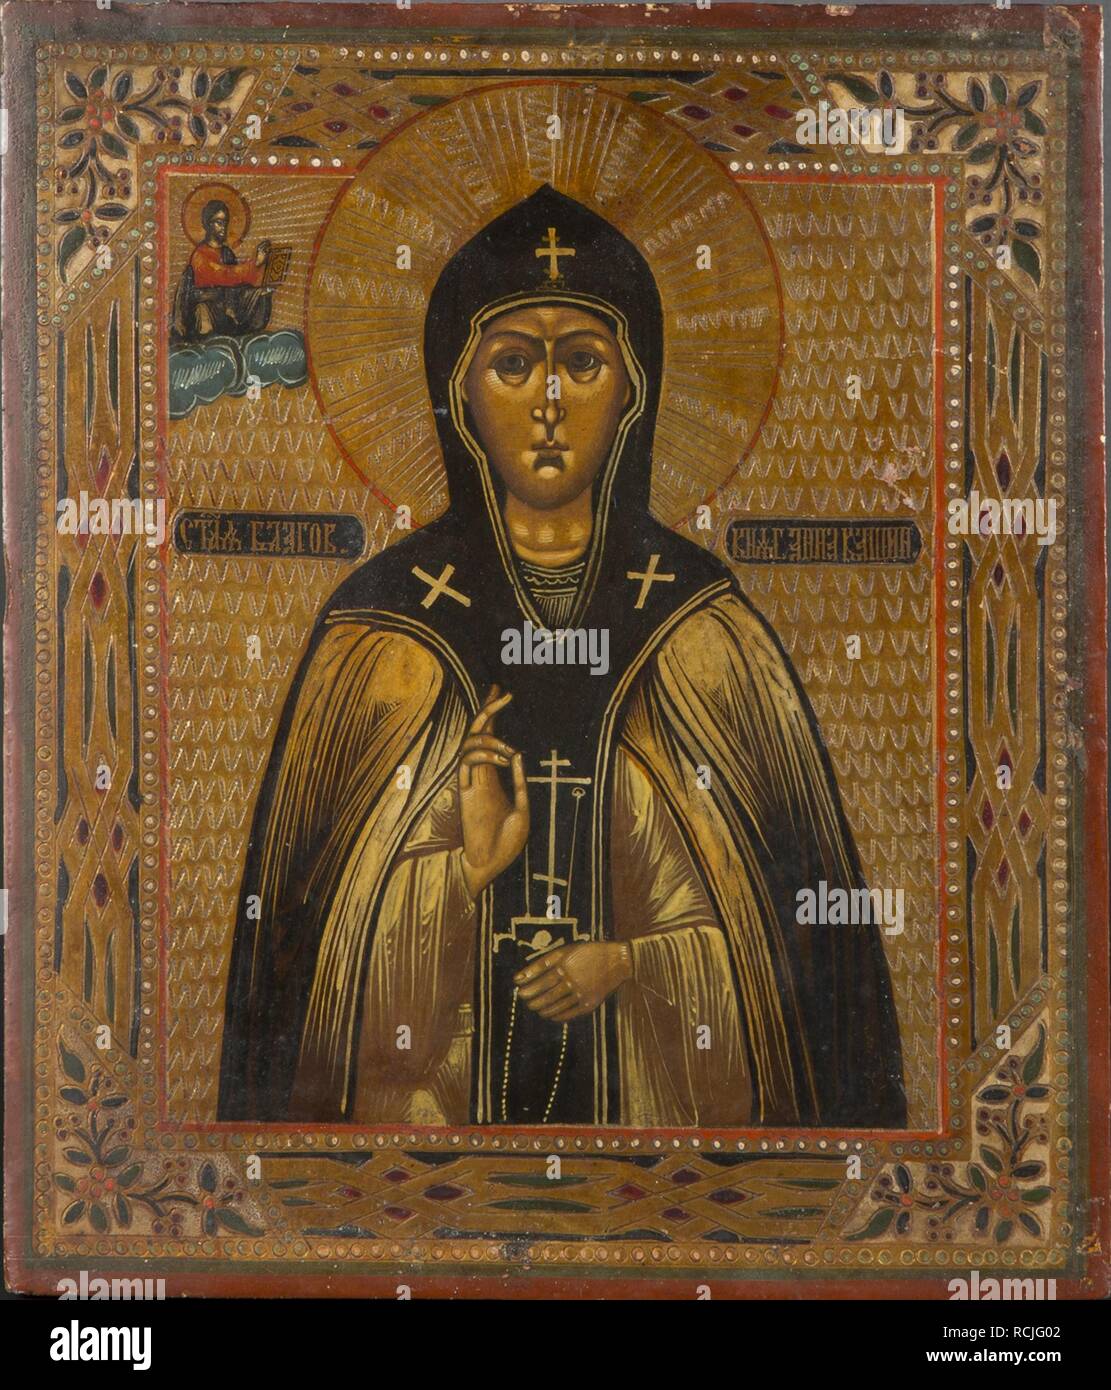 Saint Anna of Kashin. Museum: PRIVATE COLLECTION. Author: Russian icon. Stock Photo